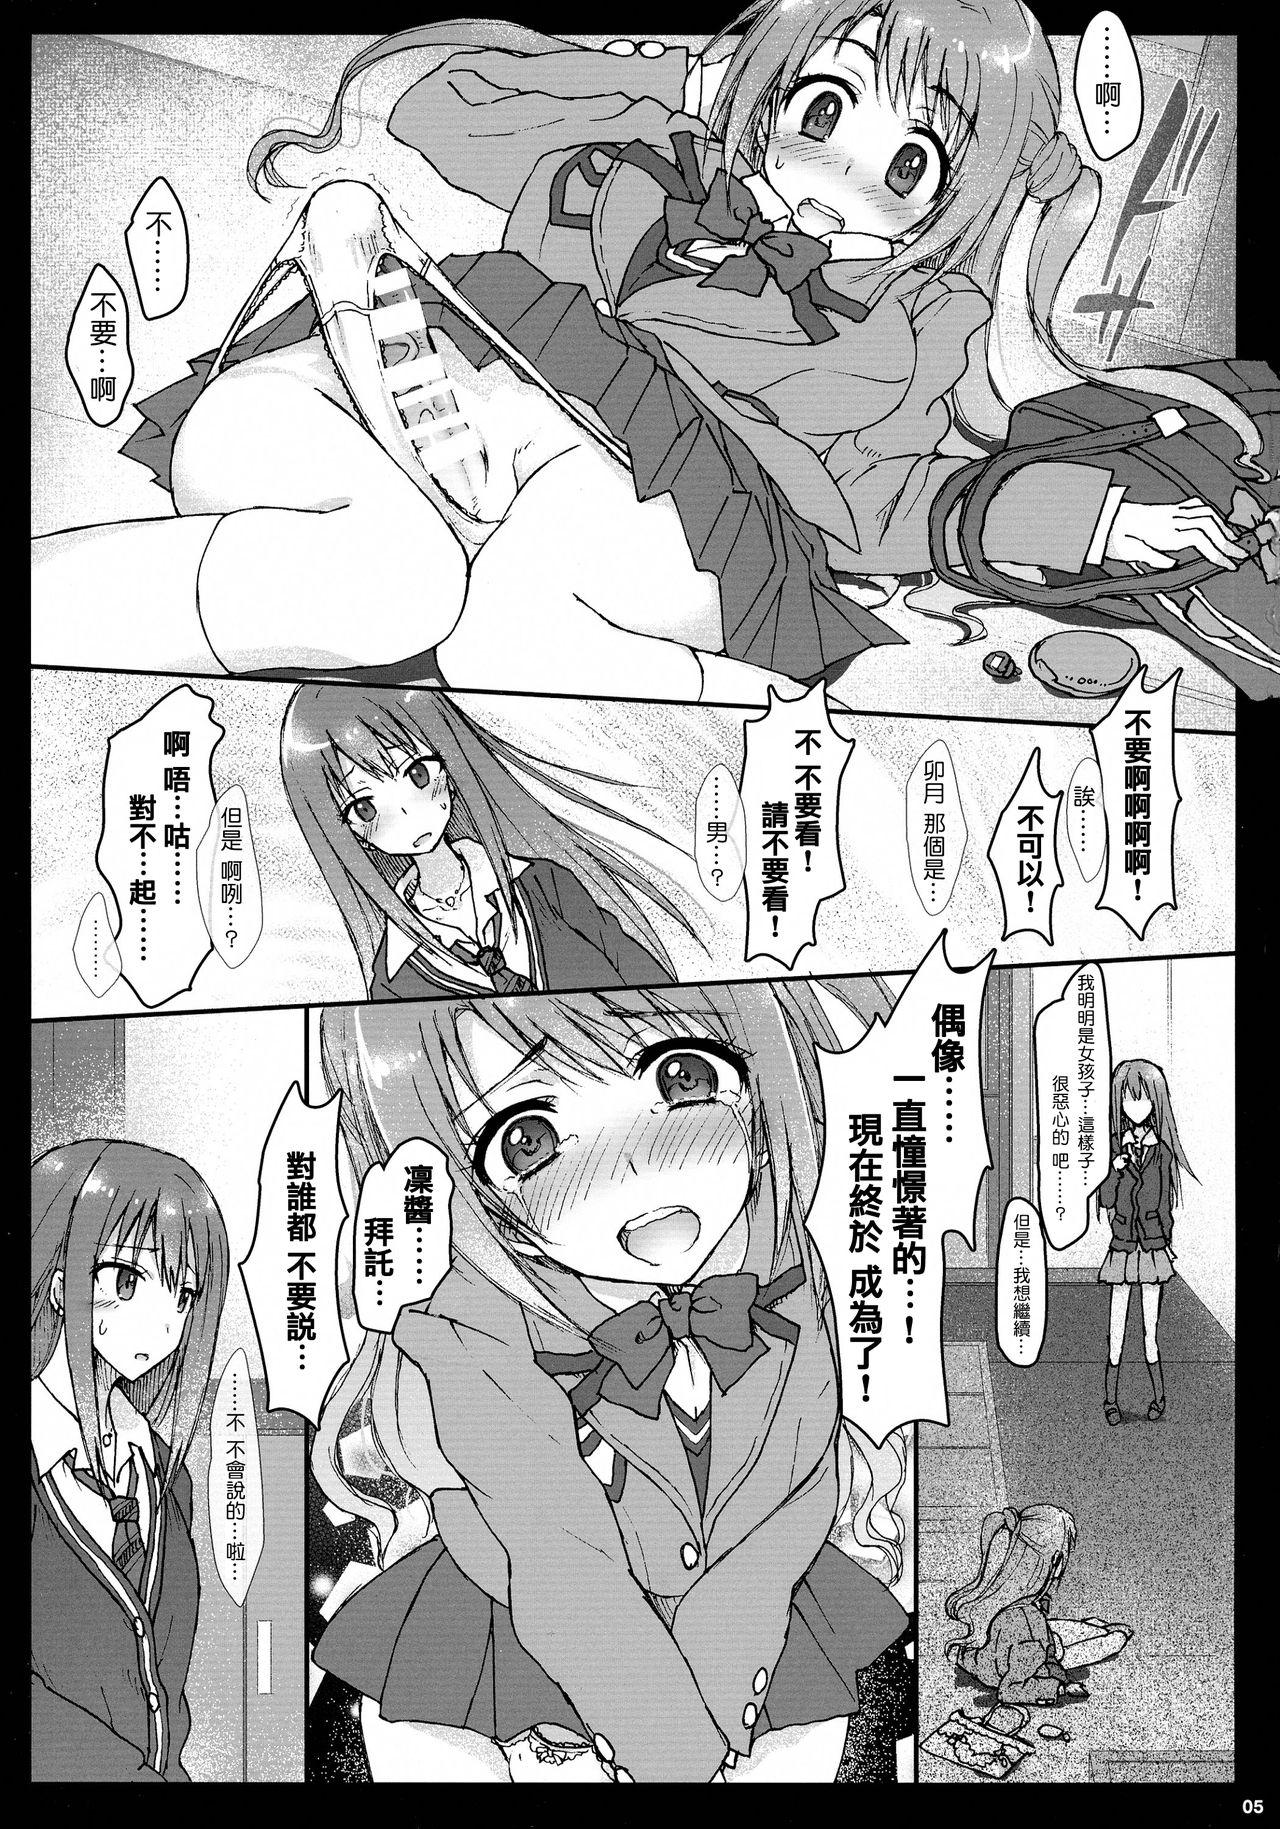 Staxxx AND THEY LIVED happily ever after... 002 - The idolmaster Submission - Page 5